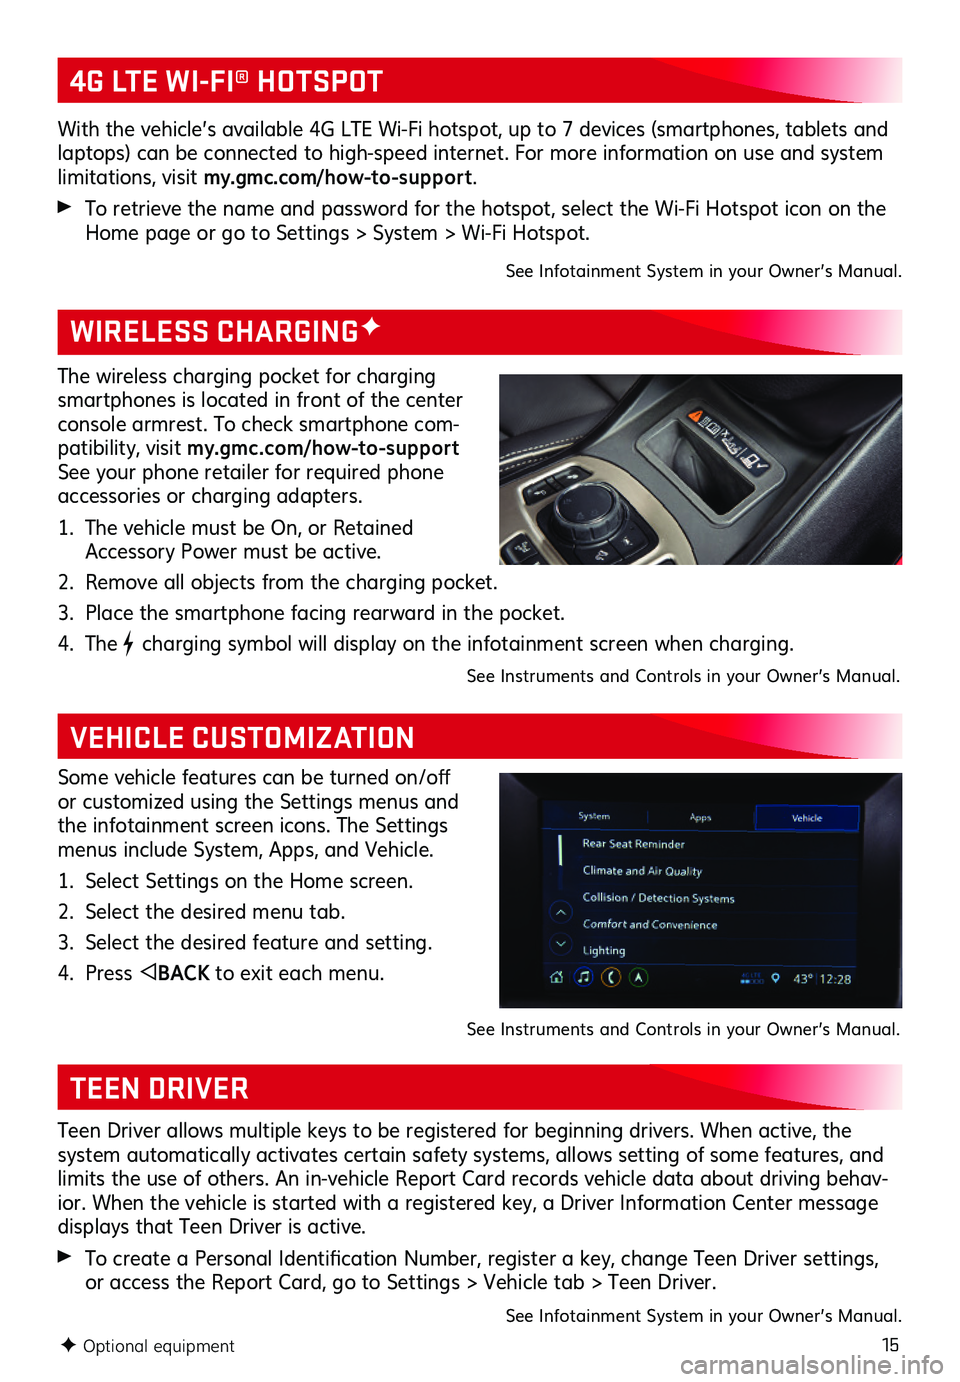 GMC TERRAIN 2021  Get To Know Guide 15F Optional equipment
WIRELESS CHARGINGF
VEHICLE CUSTOMIZATION
The wireless charging pocket for charging smartphones is located in front of the center console armrest. To check smartphone com-patibil